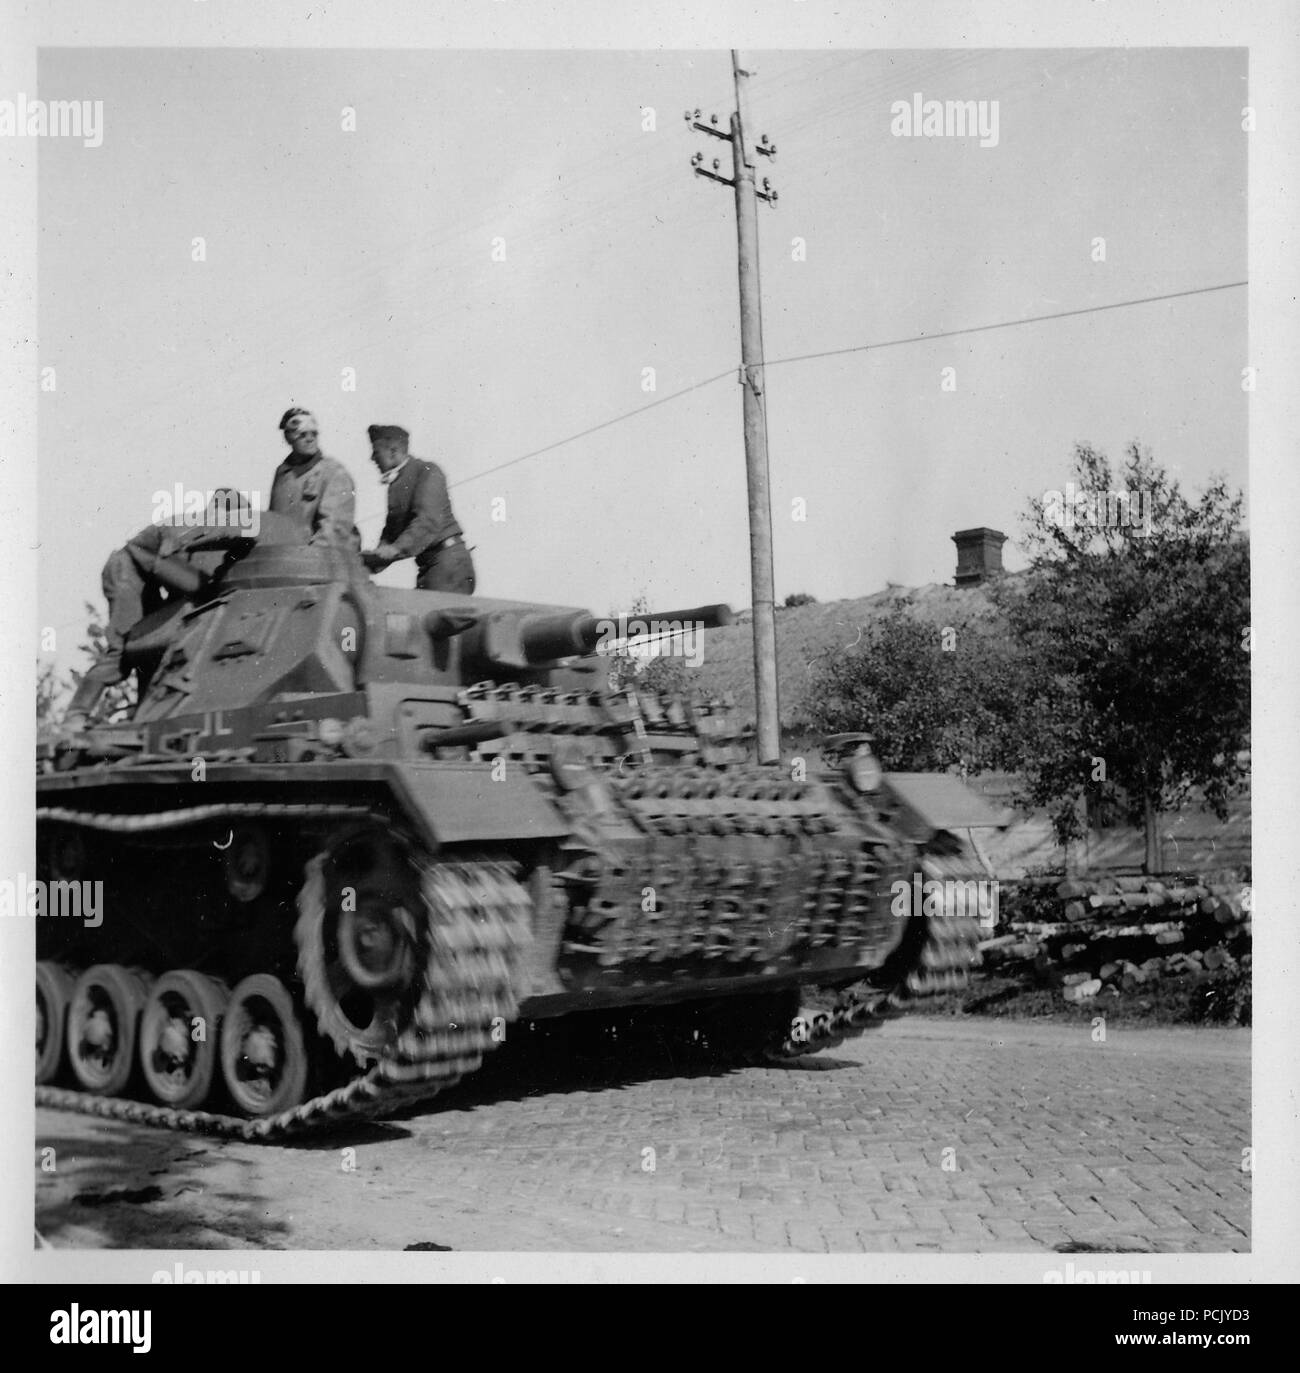 Image from a photo album relating to II. Gruppe, Jagdgeschwader 3: A Panzer III of 13th Panzer Division rolls down a Russian road in summer 1941. The crew has fixed spare tracks to the front of the tank for added protection against Soviet anti-tank weapons. Stock Photo